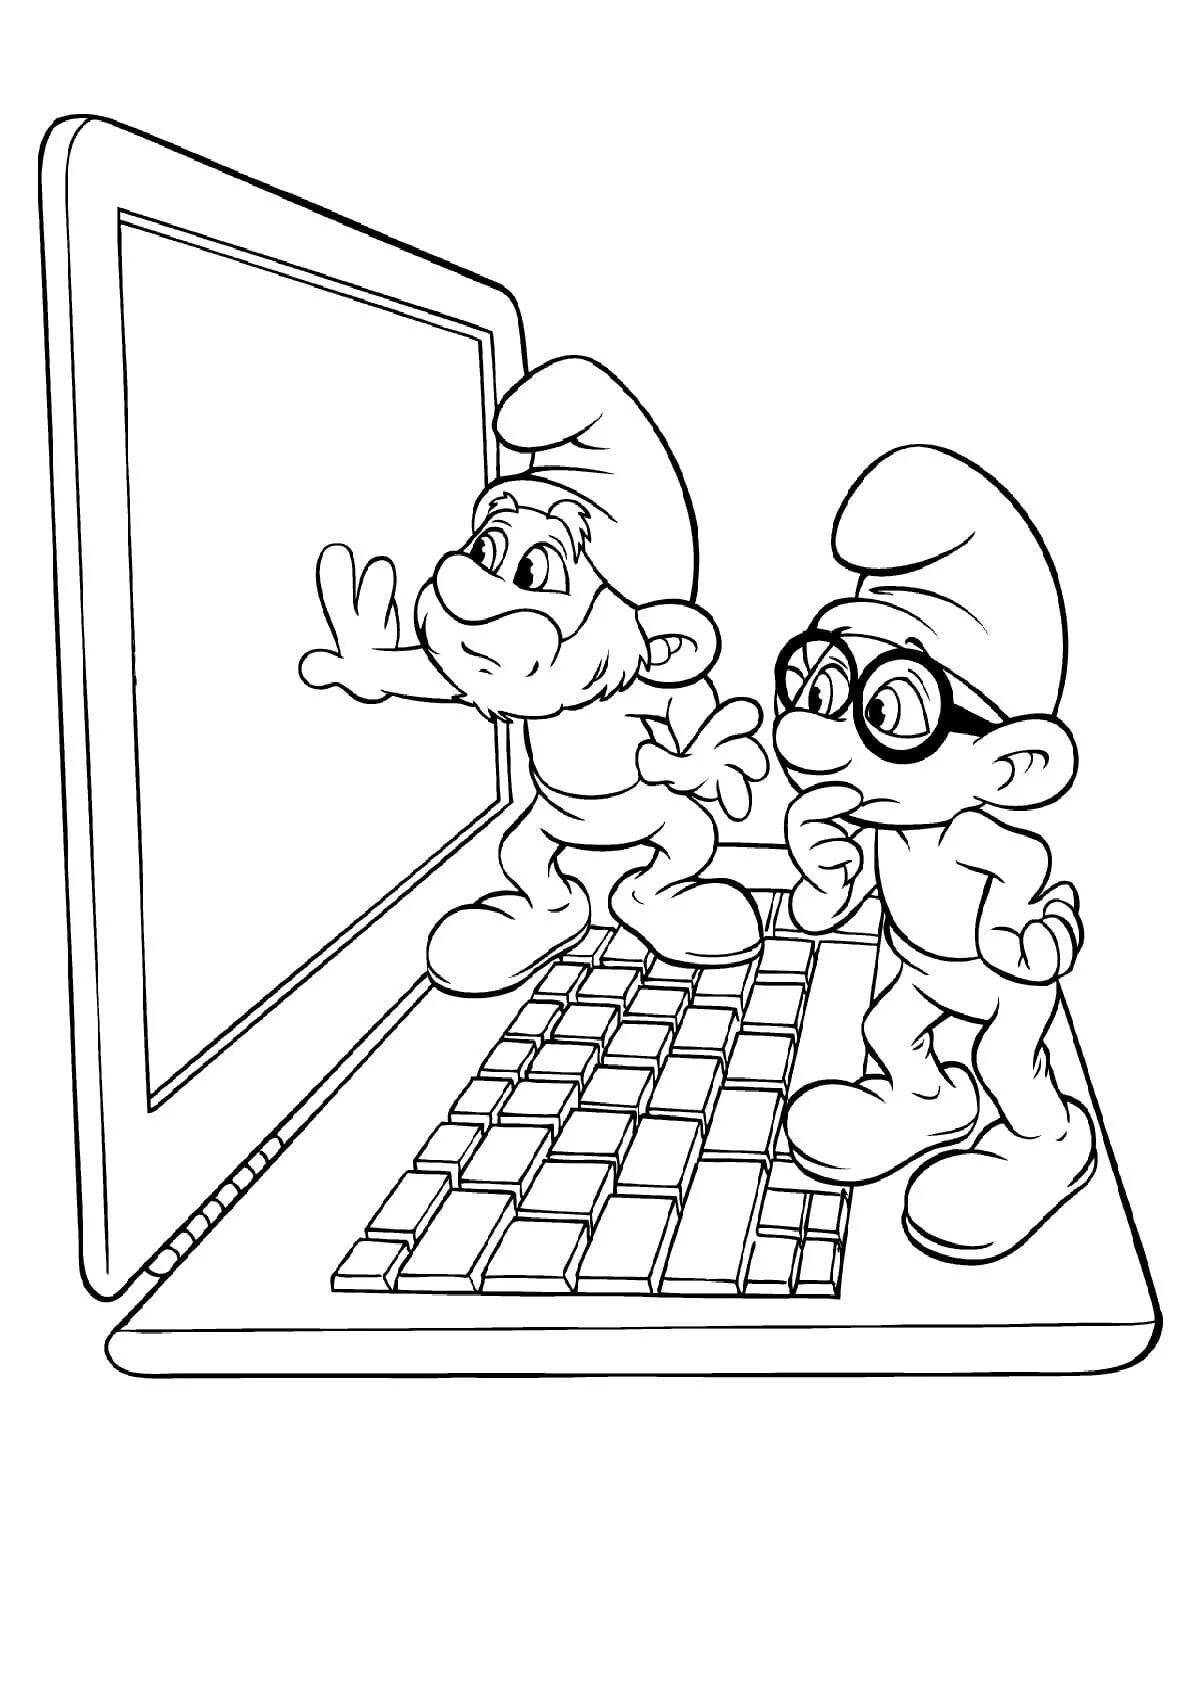 Adorable online coloring book for kids